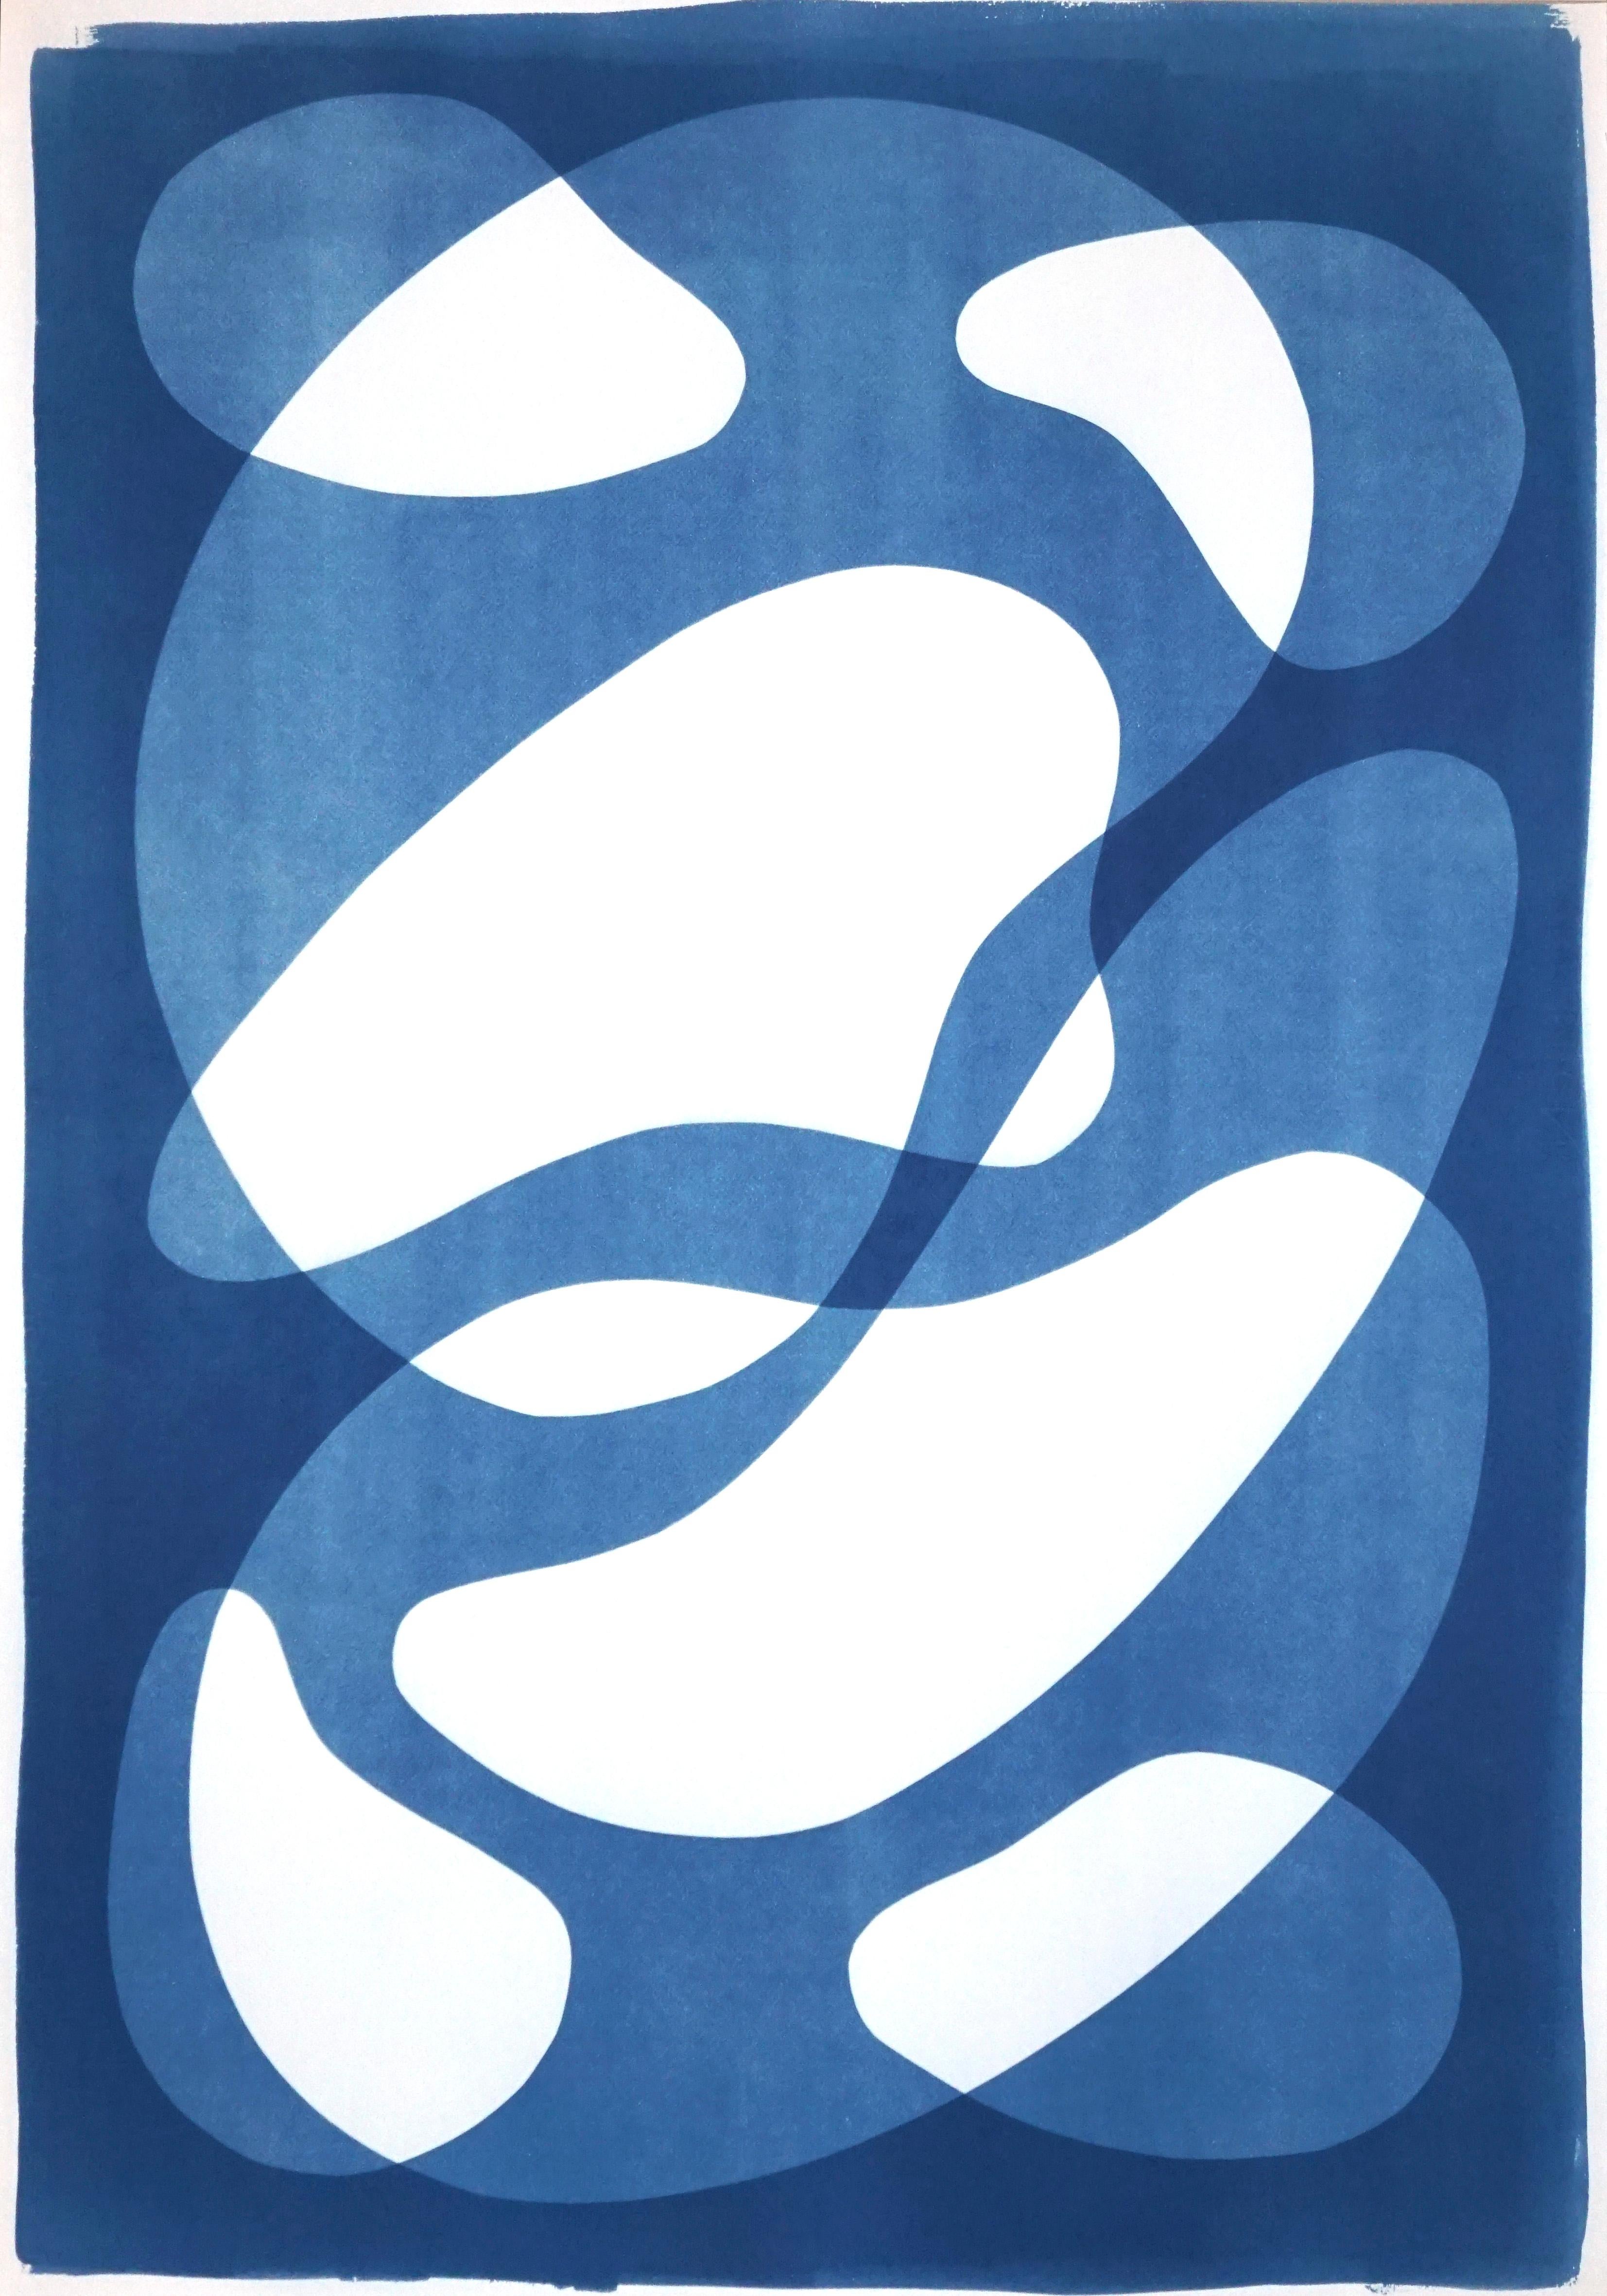 Kind of Cyan Abstract Photograph - Abstracted Blue Face II, Mid-Century Shapes Figures on Paper, Handmade Monotype